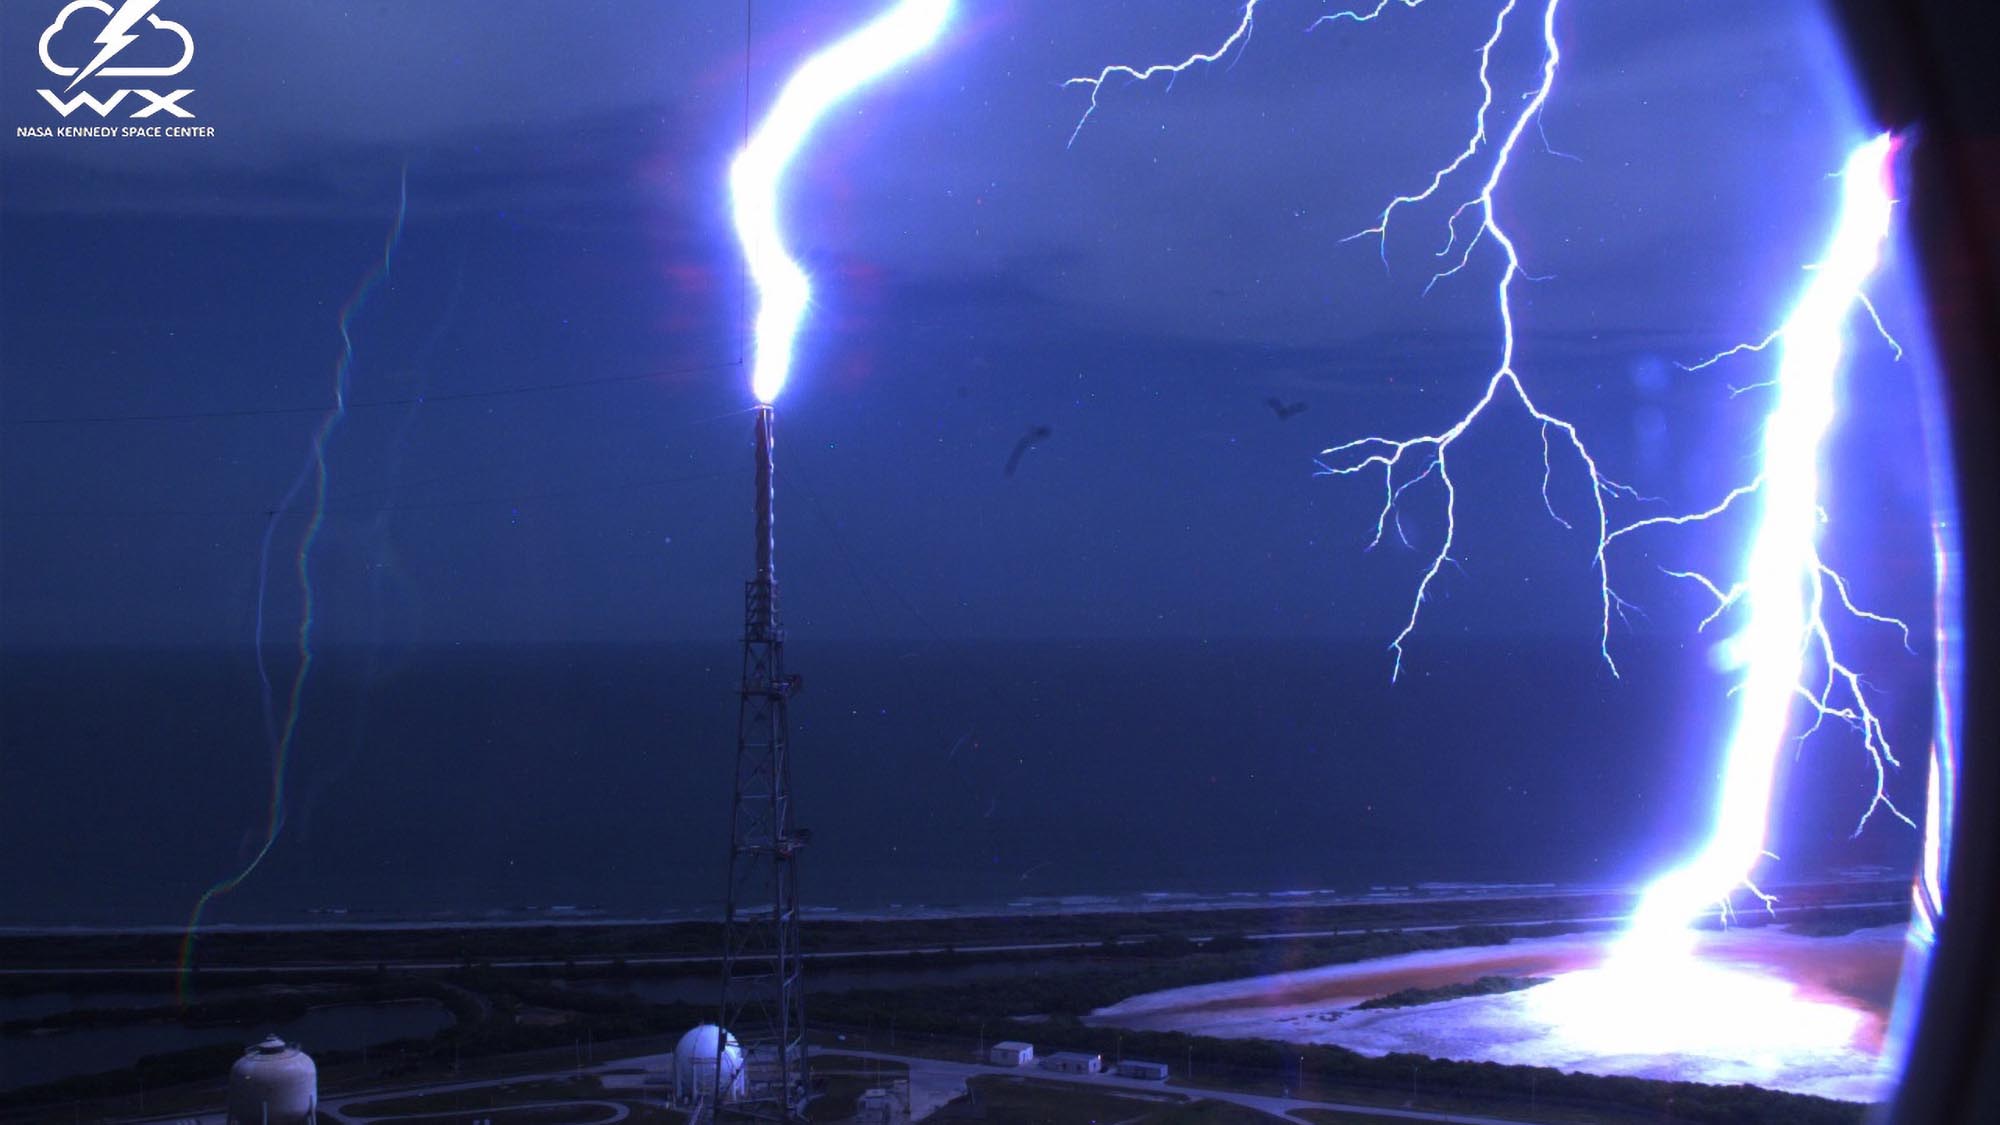 Read more about the article Footage Shows 10 Years Of Lightning Bolts Zapping NASA’s Kennedy Space Center